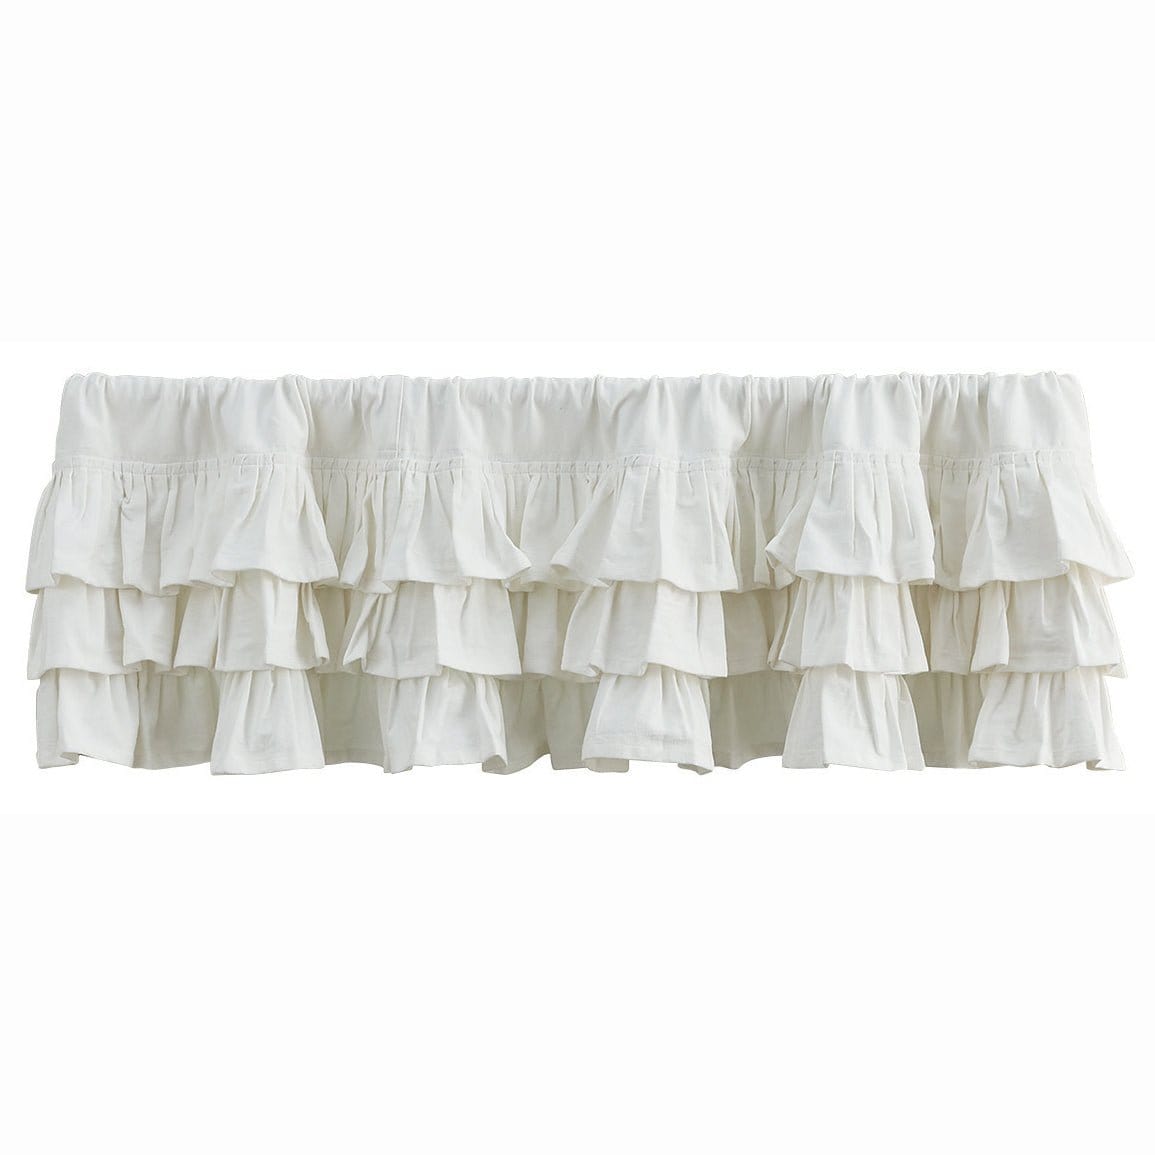 Ruffle in White Valance 60" Wide Unlined-Park Designs-The Village Merchant